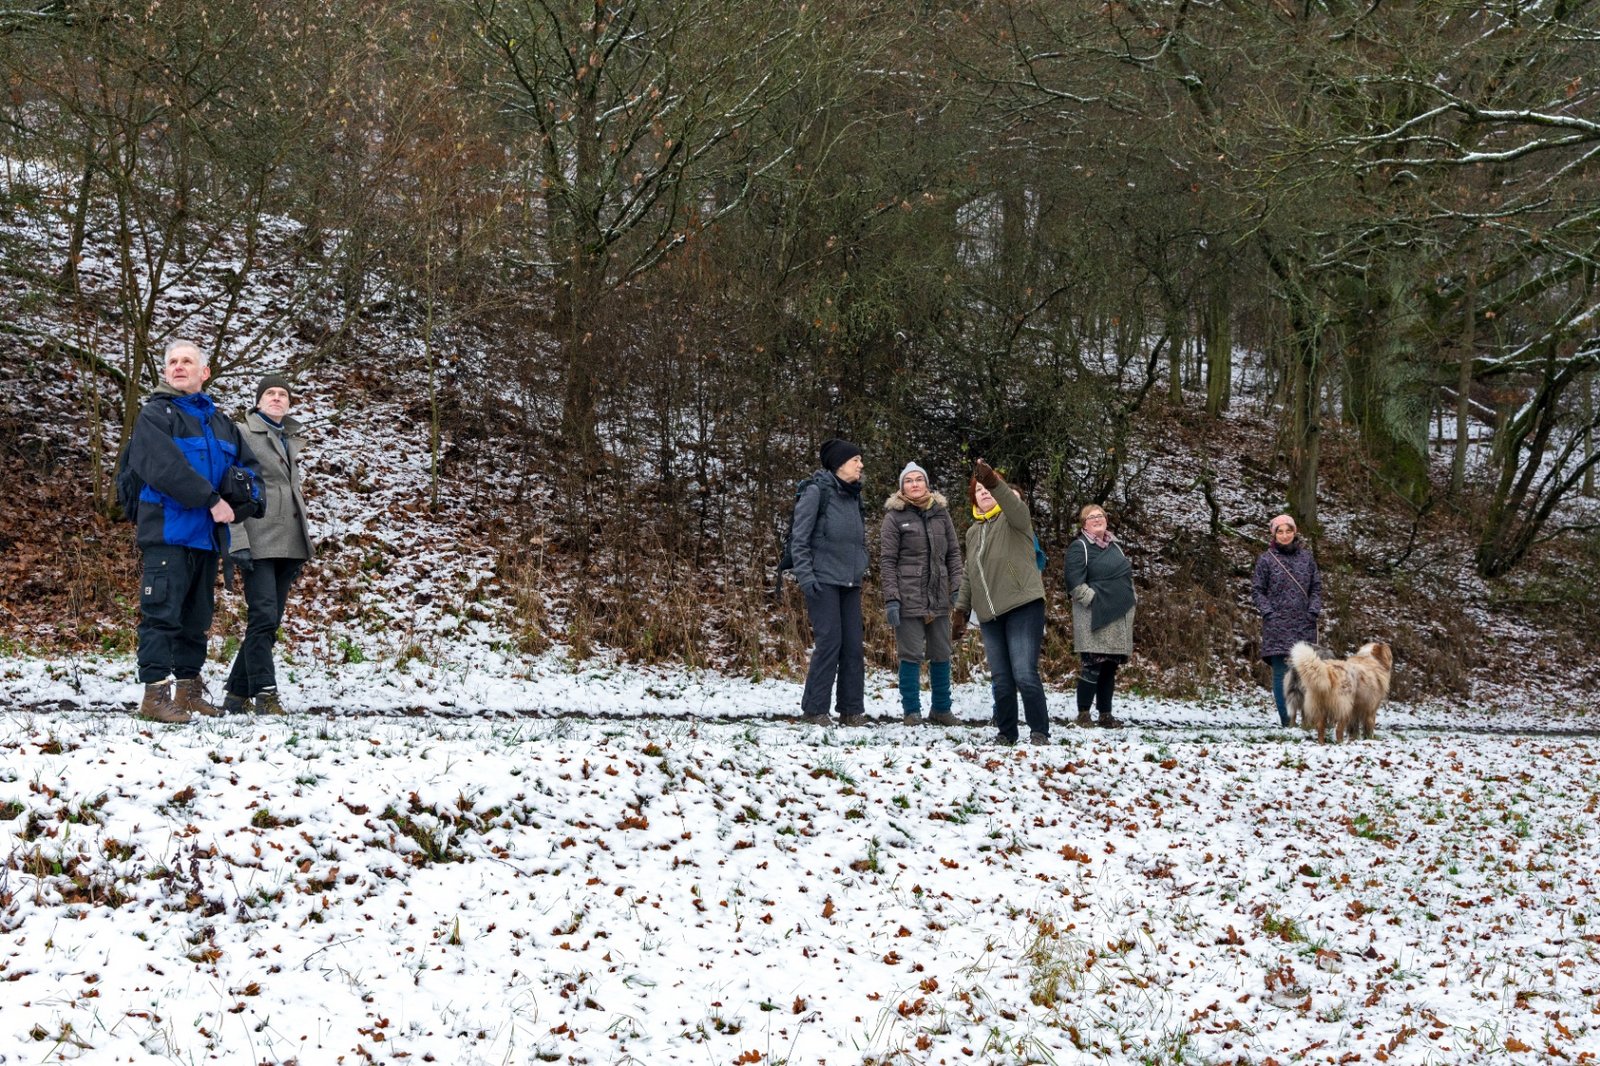 Several persons of The New Patrons of Waldeck-Frankenberg stand outside in the snow